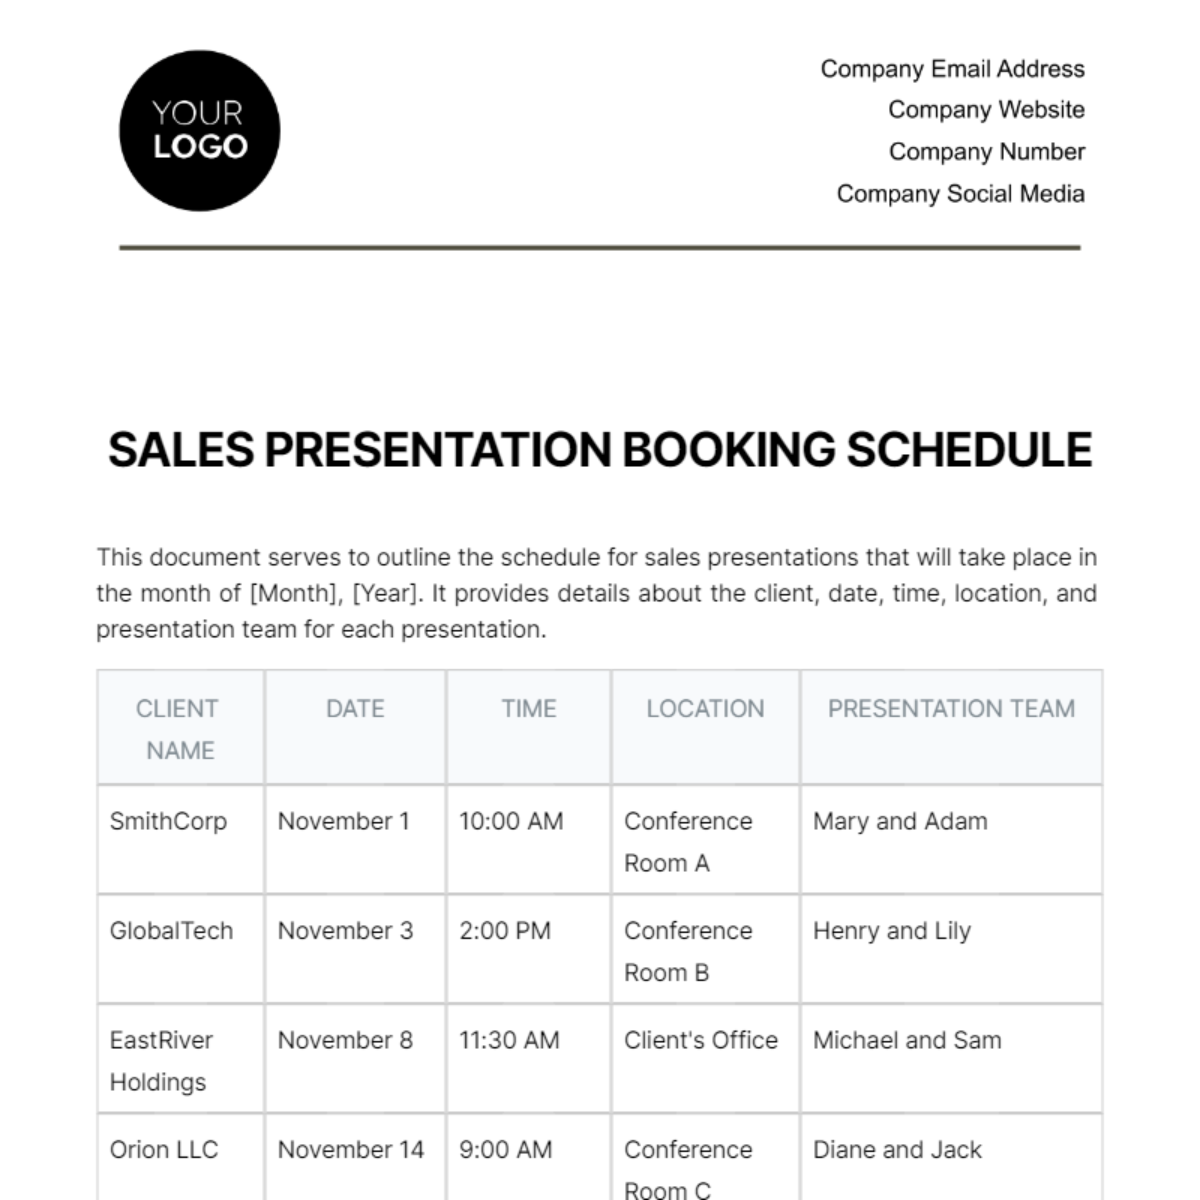 Free Sales Presentation Booking Schedule Template